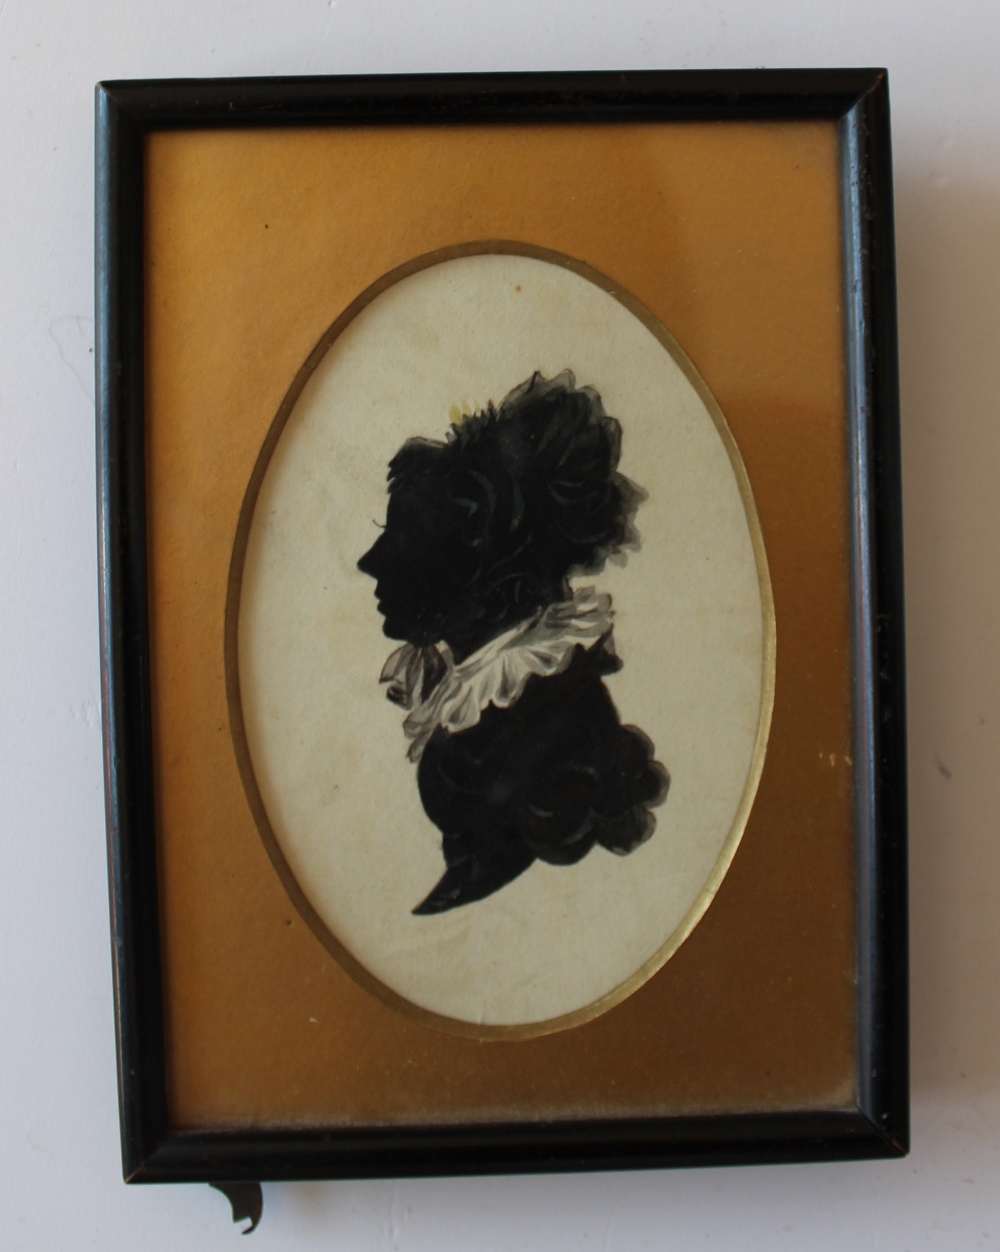 19th century British School
A silhouette of the head and shoulders of a lady
Watercolour
Oval
11 x - Image 2 of 3